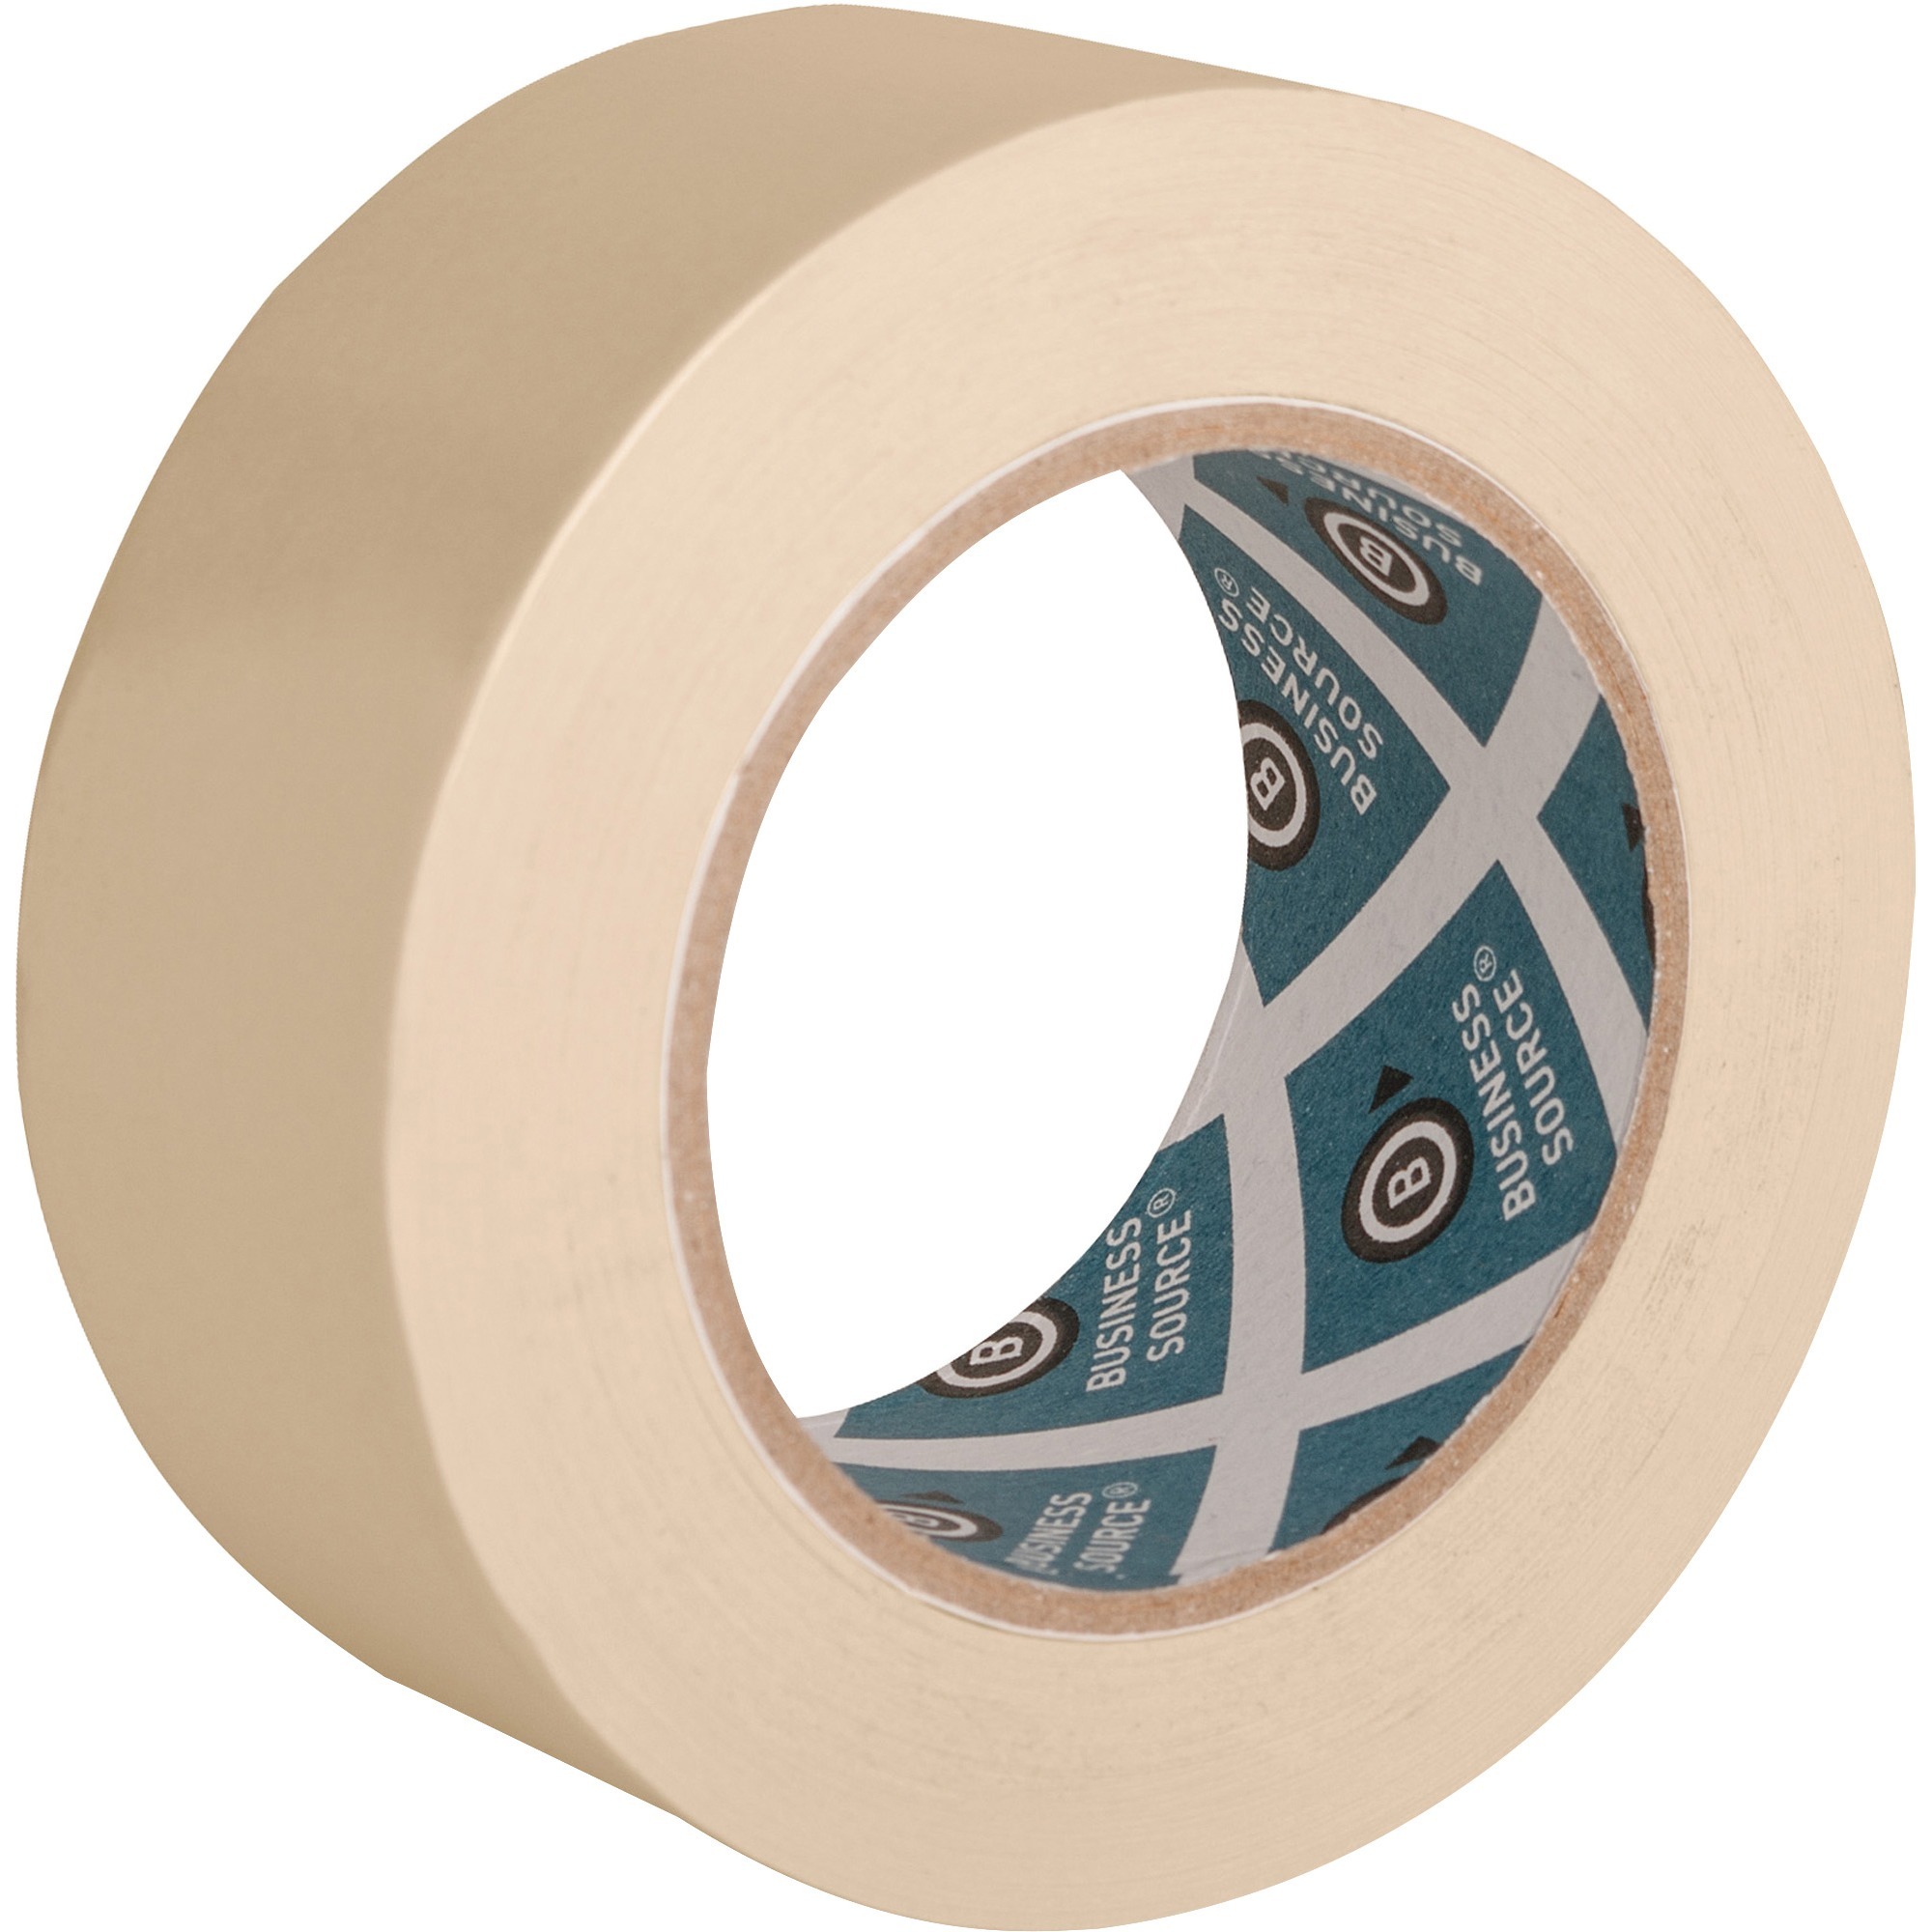 Business Source 2" Utility-purpose Masking Tape - Each